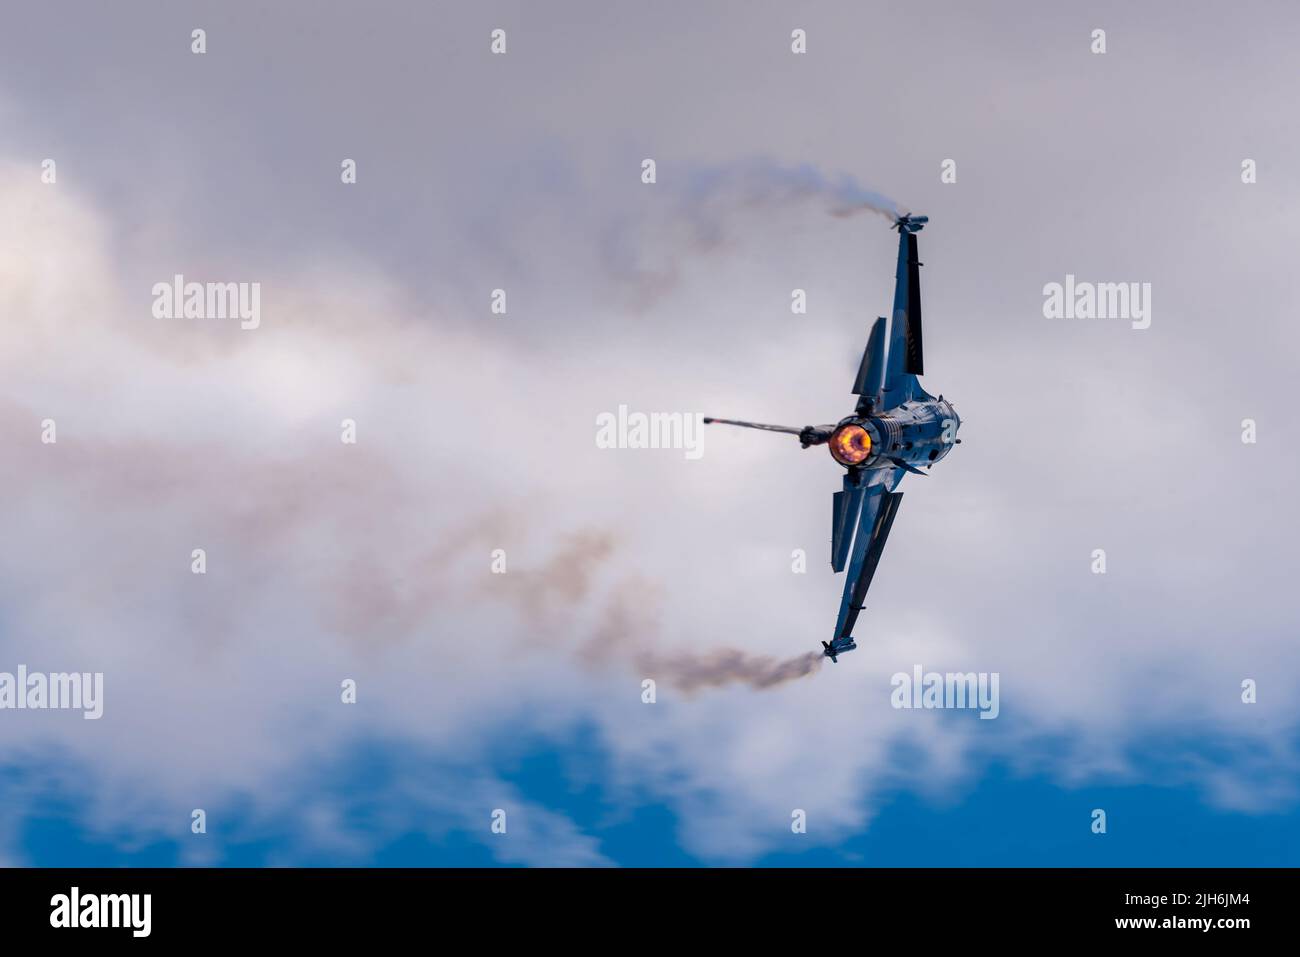 Konya / Turkey - 06.30.2022: Soloturk, one of two demo teams of Turkish Air Force, performing an astonishing display at Anatolian Eagle Exercise Stock Photo